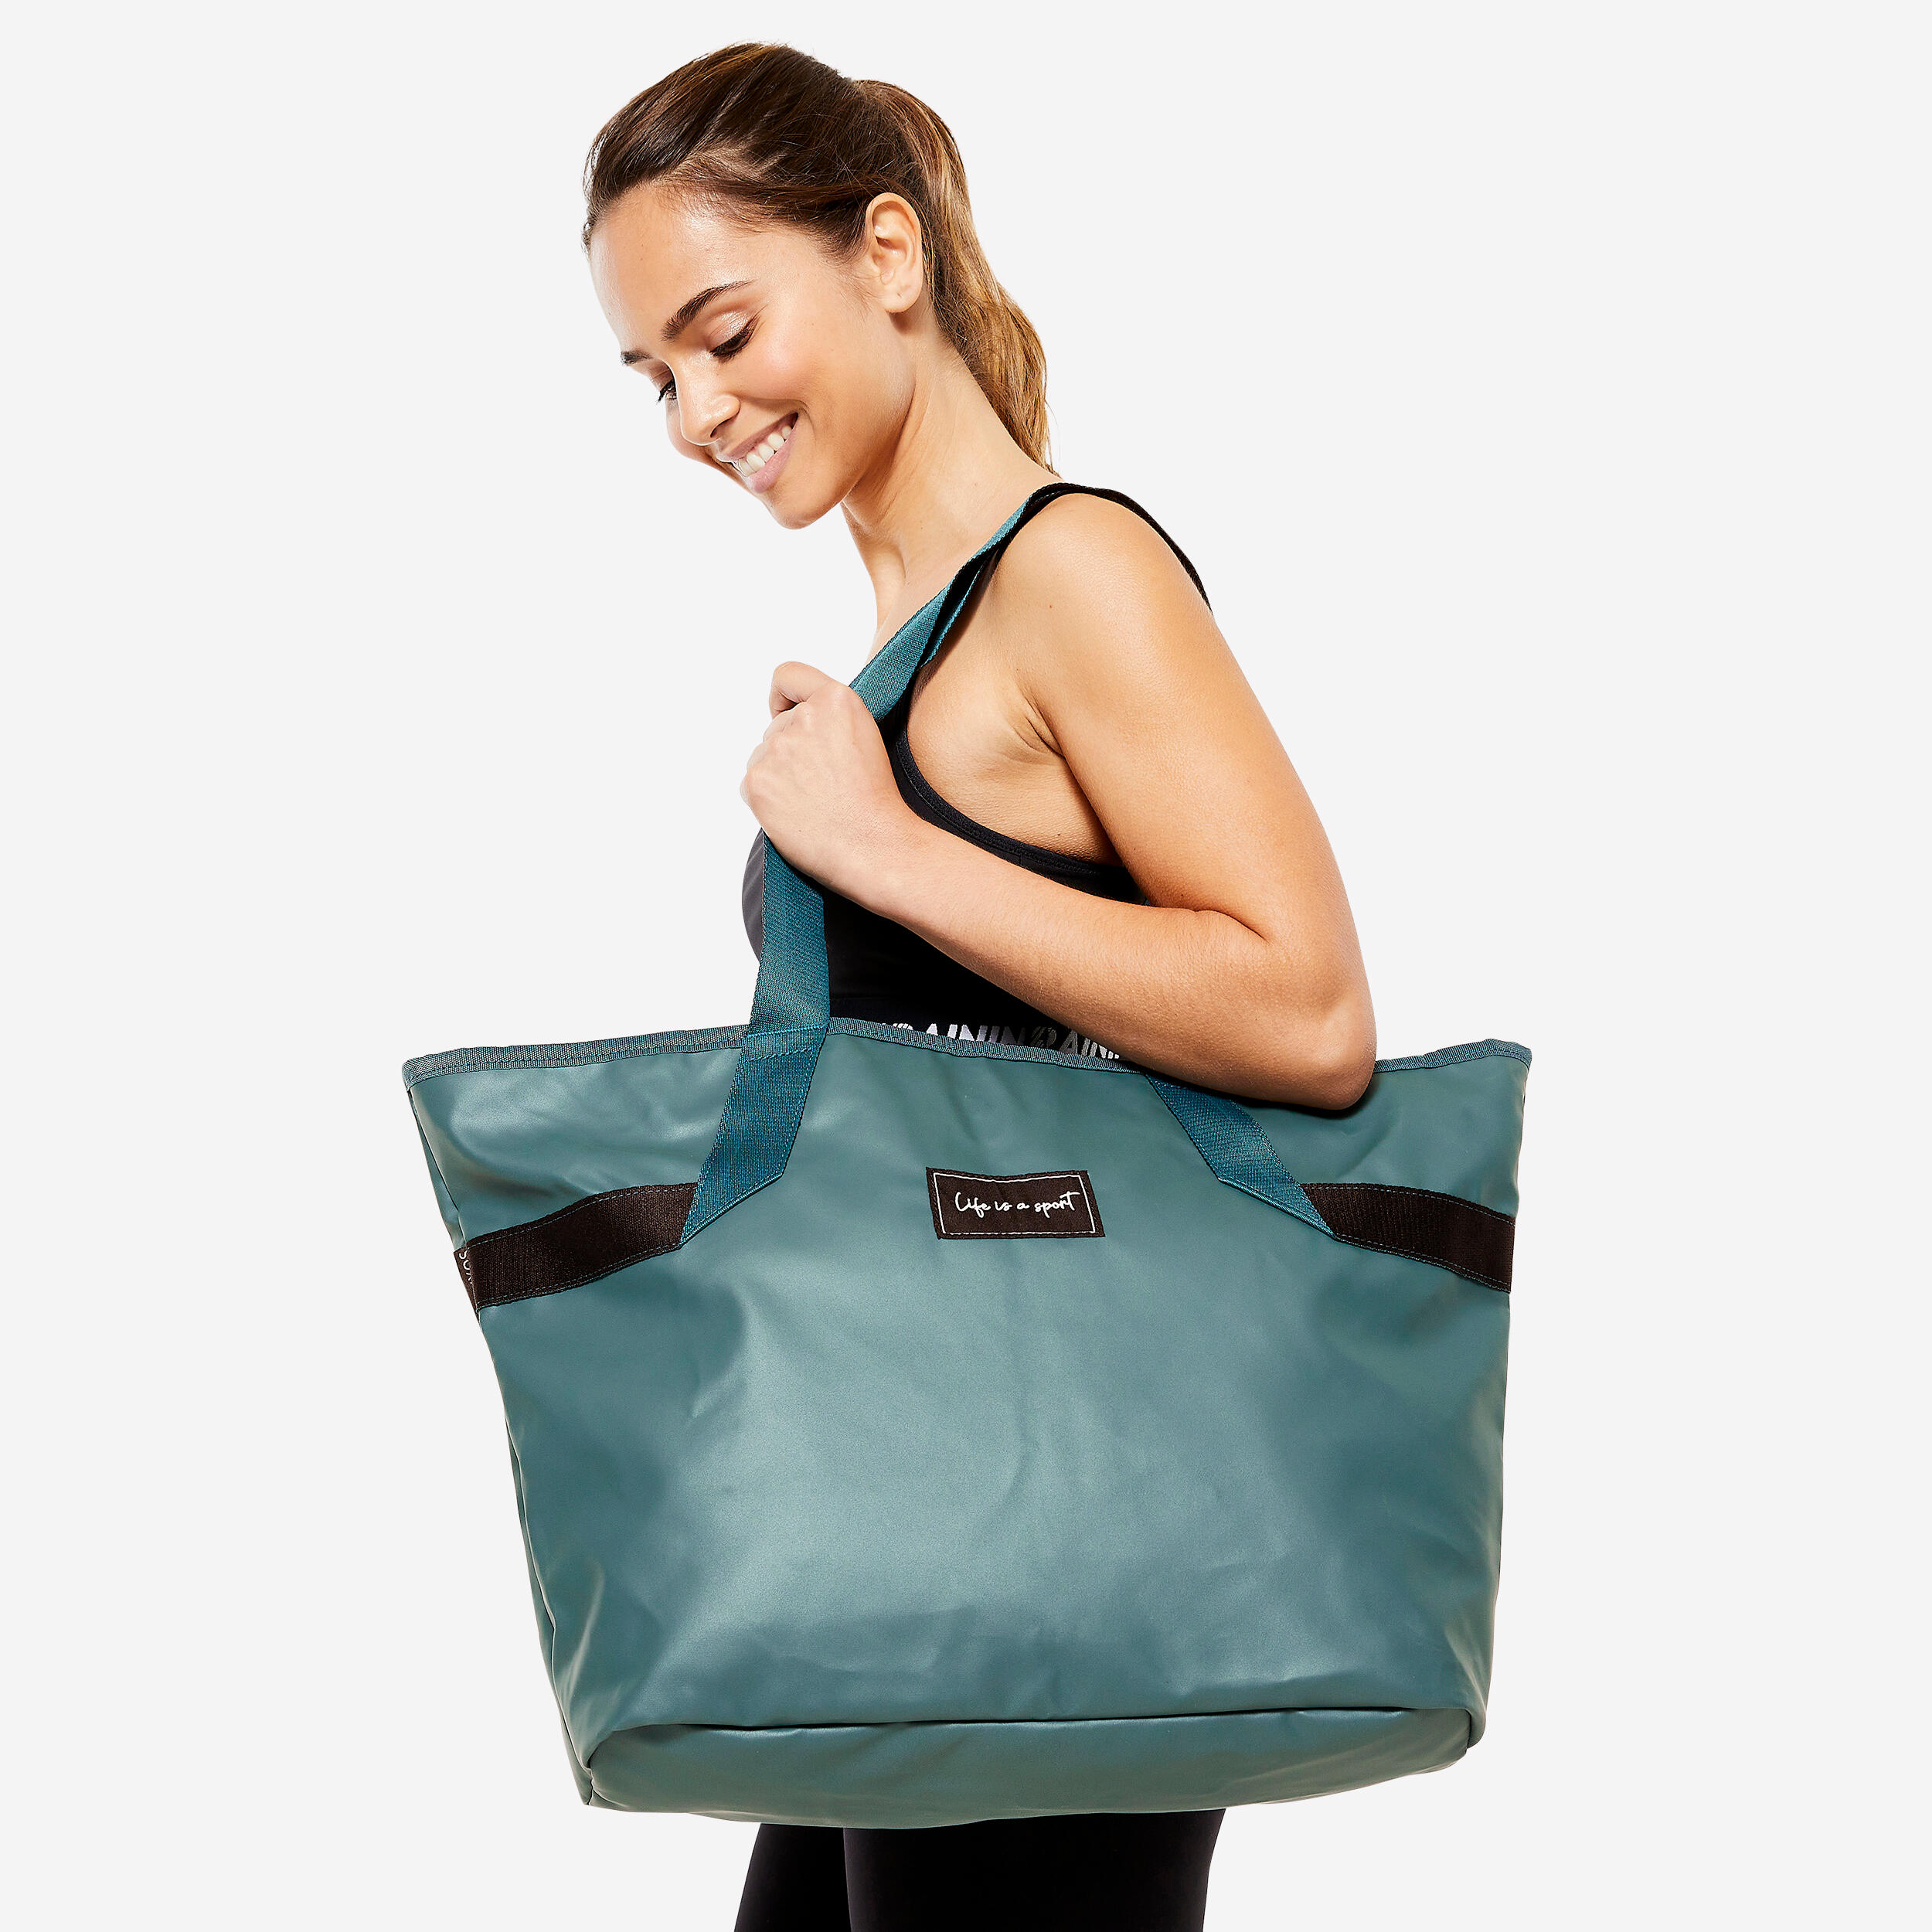 Women's 25 L Bag with Pockets - Turquoise 1/9